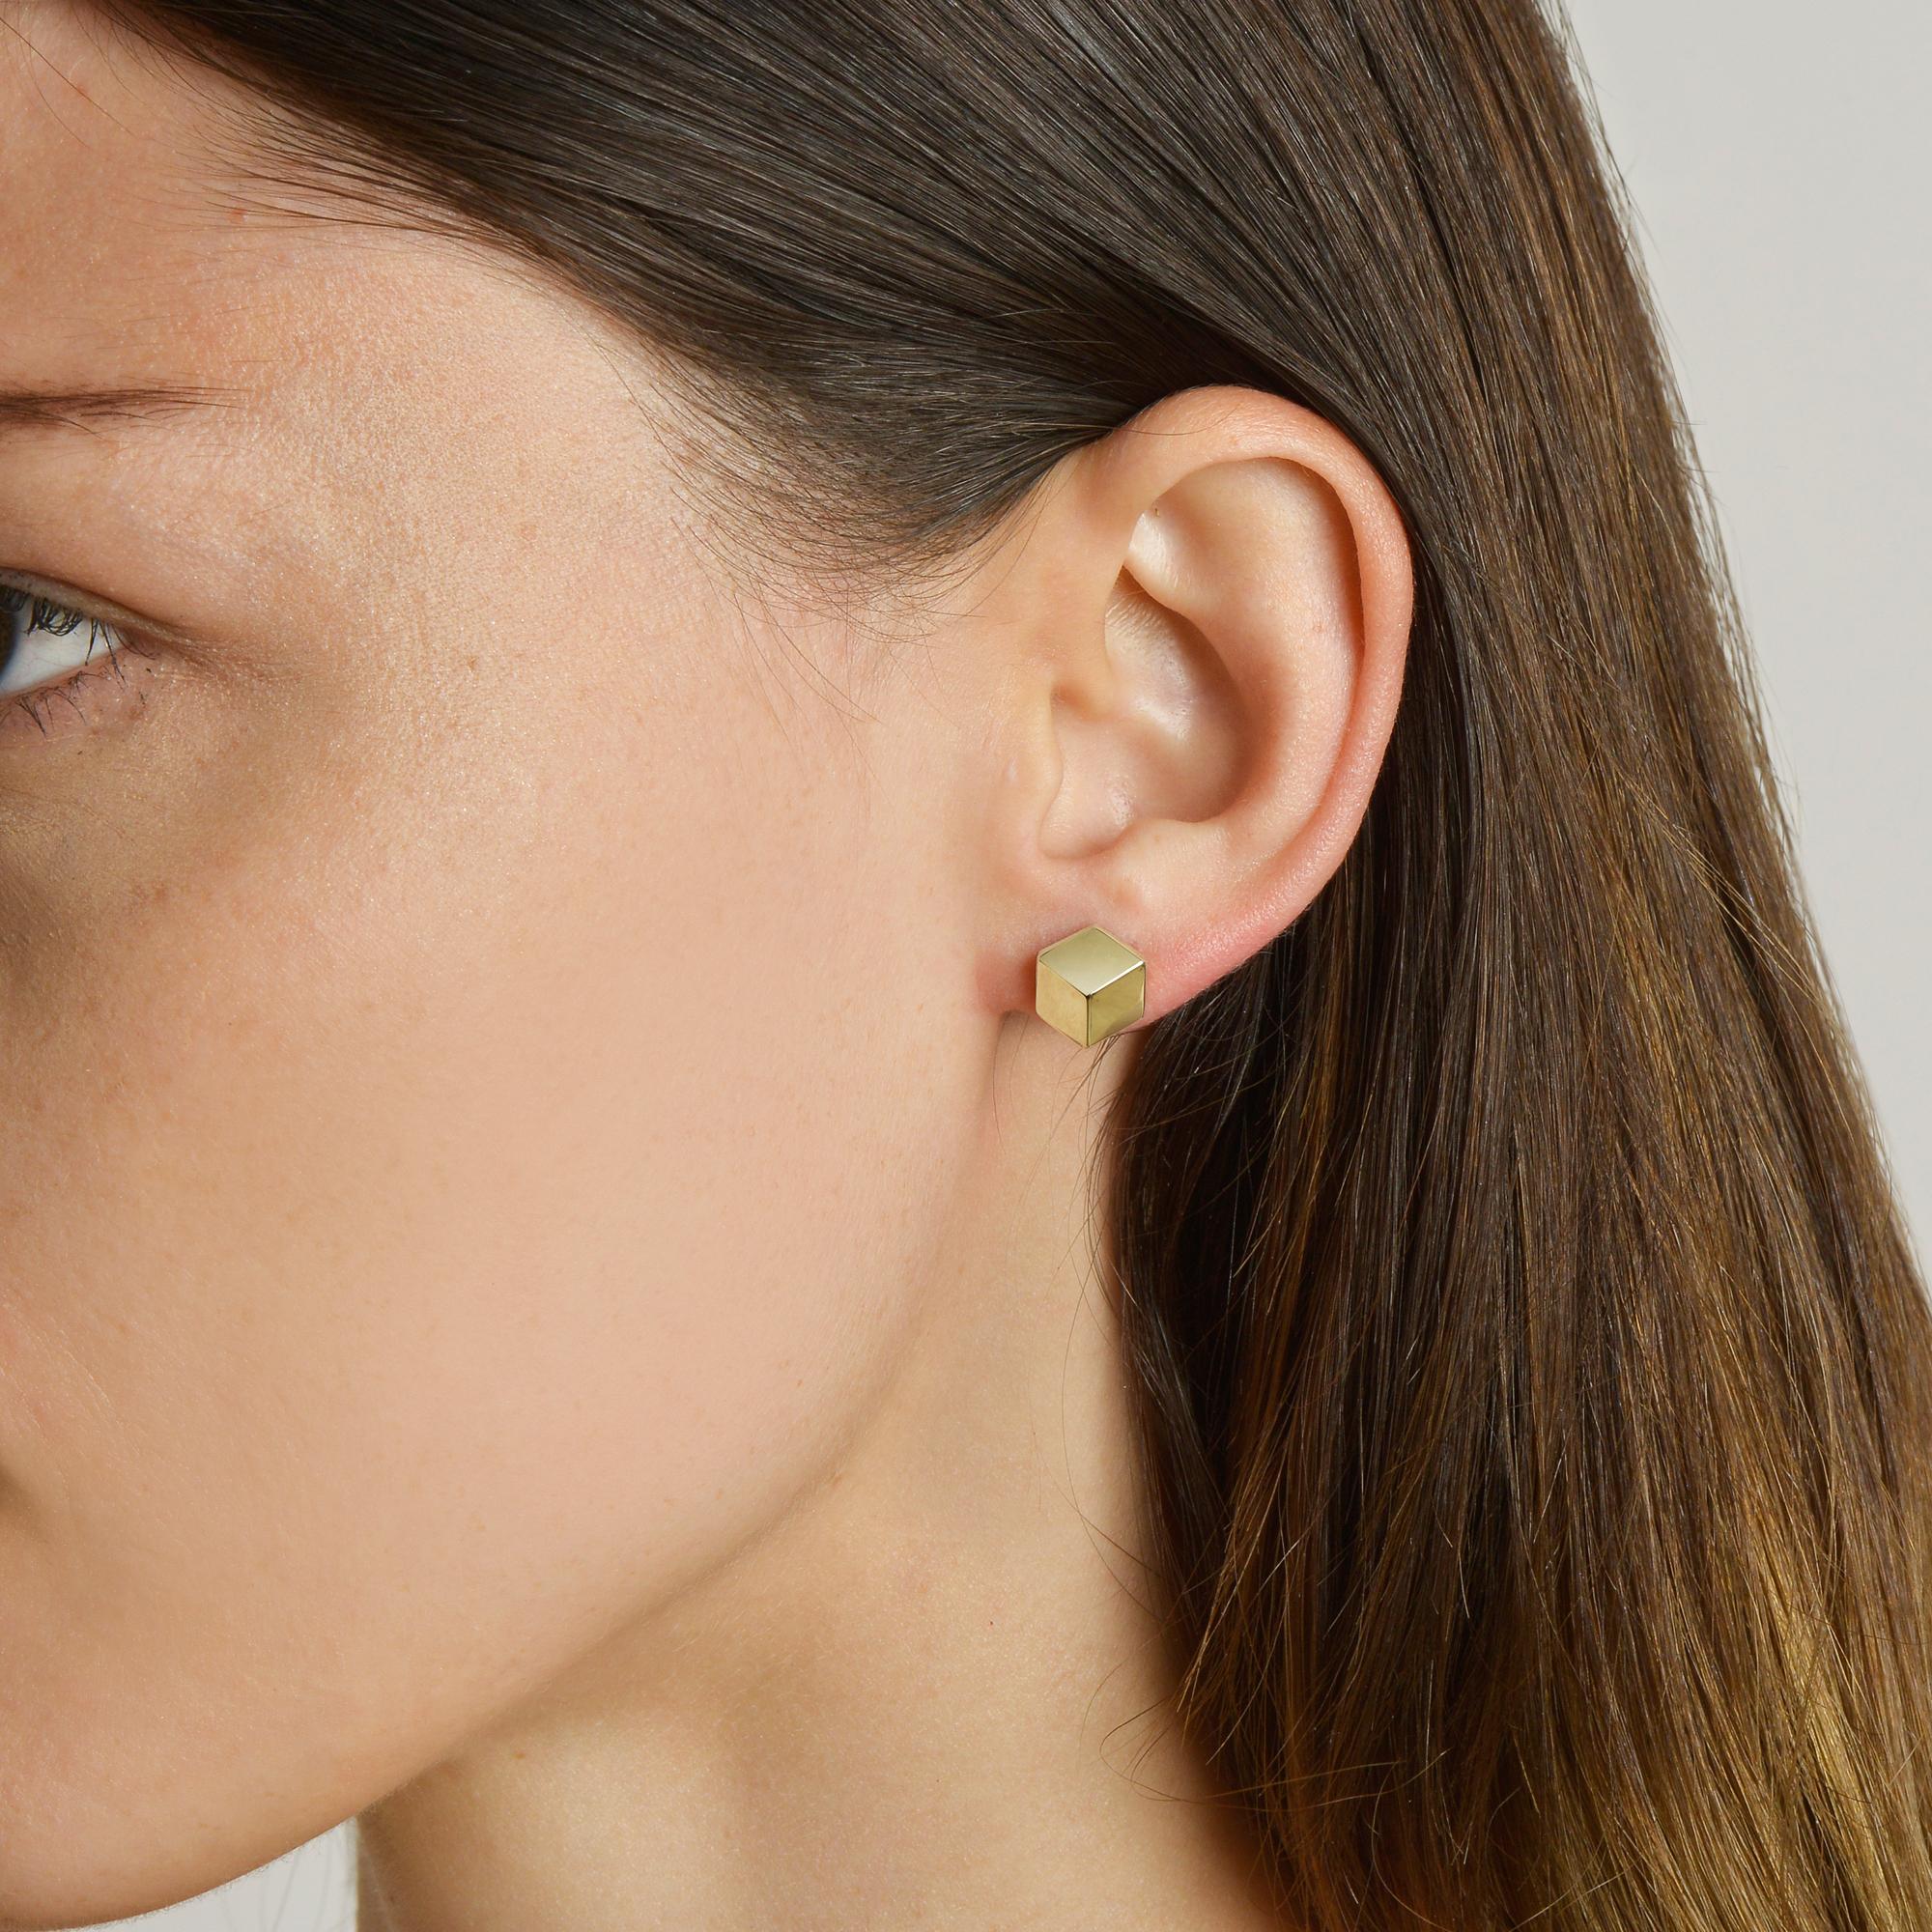 18kt yellow gold Brillante® stud earrings, petite.

Translated from a quintessential Venetian motif, the Brillante® jewelry collection combines strong jewelry design, cutting edge technology and fine engineering.

A bracelet from this iconic and